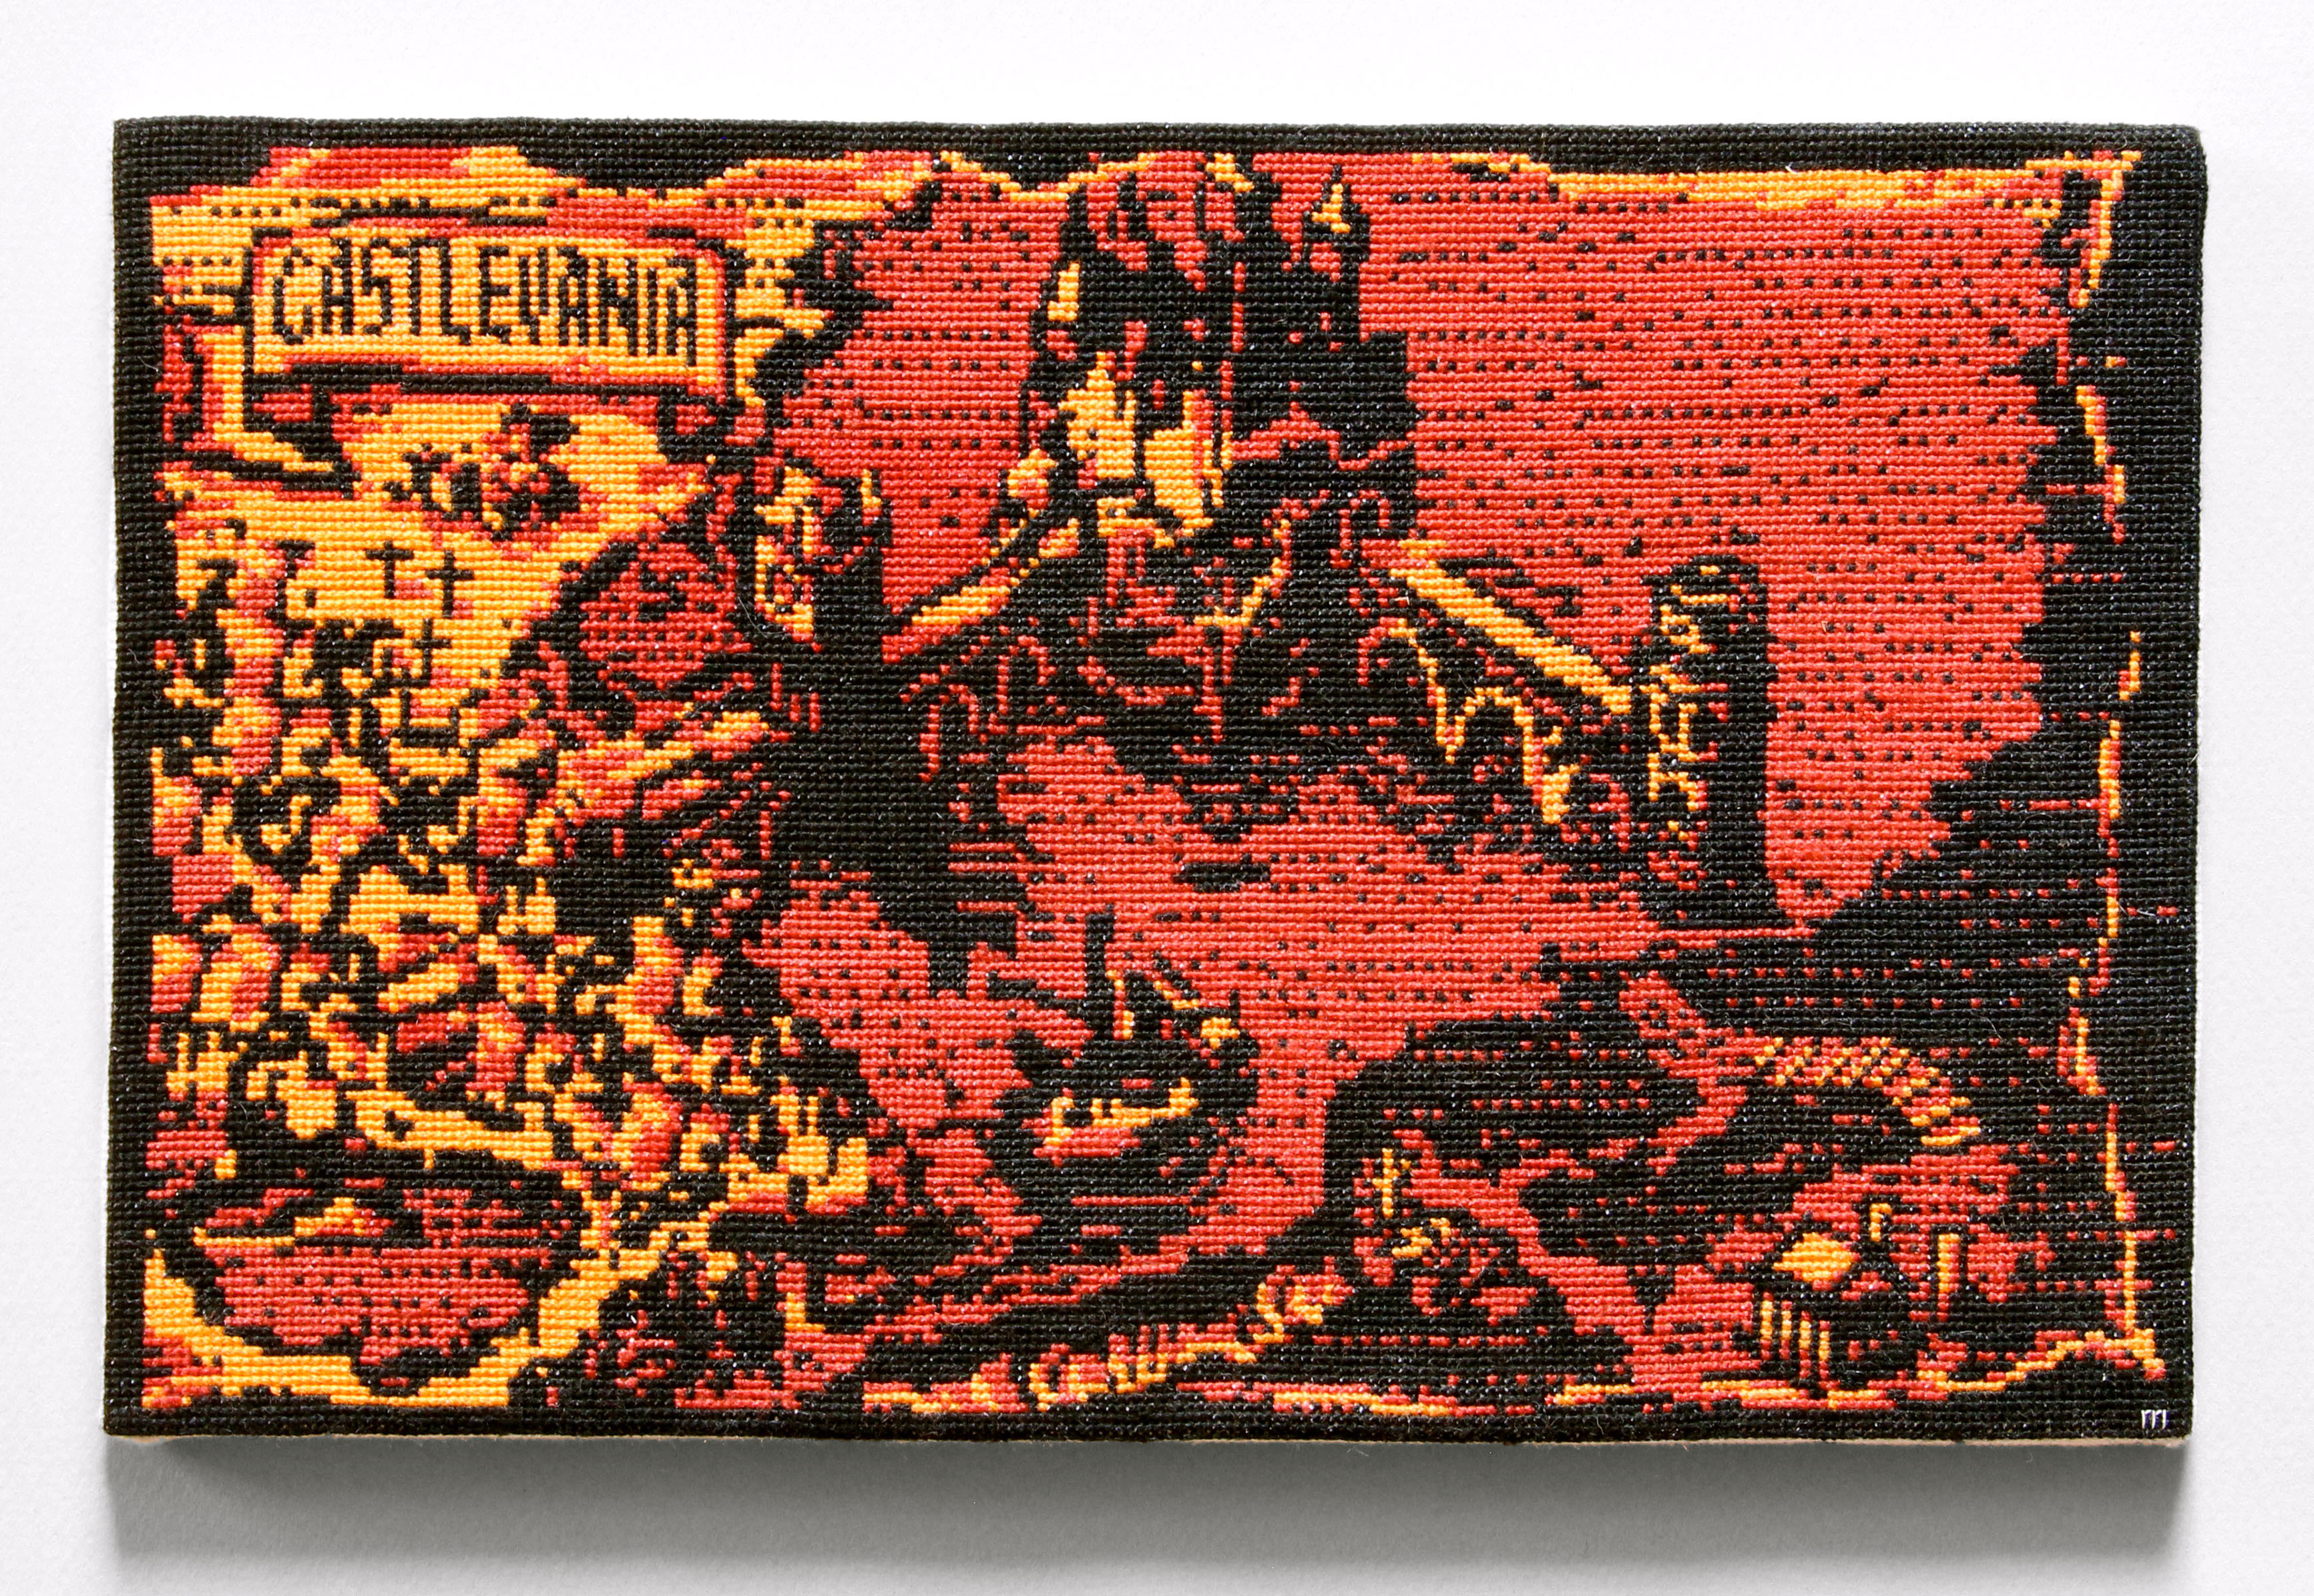  / Cross-stitch embroidery from *Castlevania III: Dracula’s Curse*, video game on NES. Art by artist Marine Beaufils.